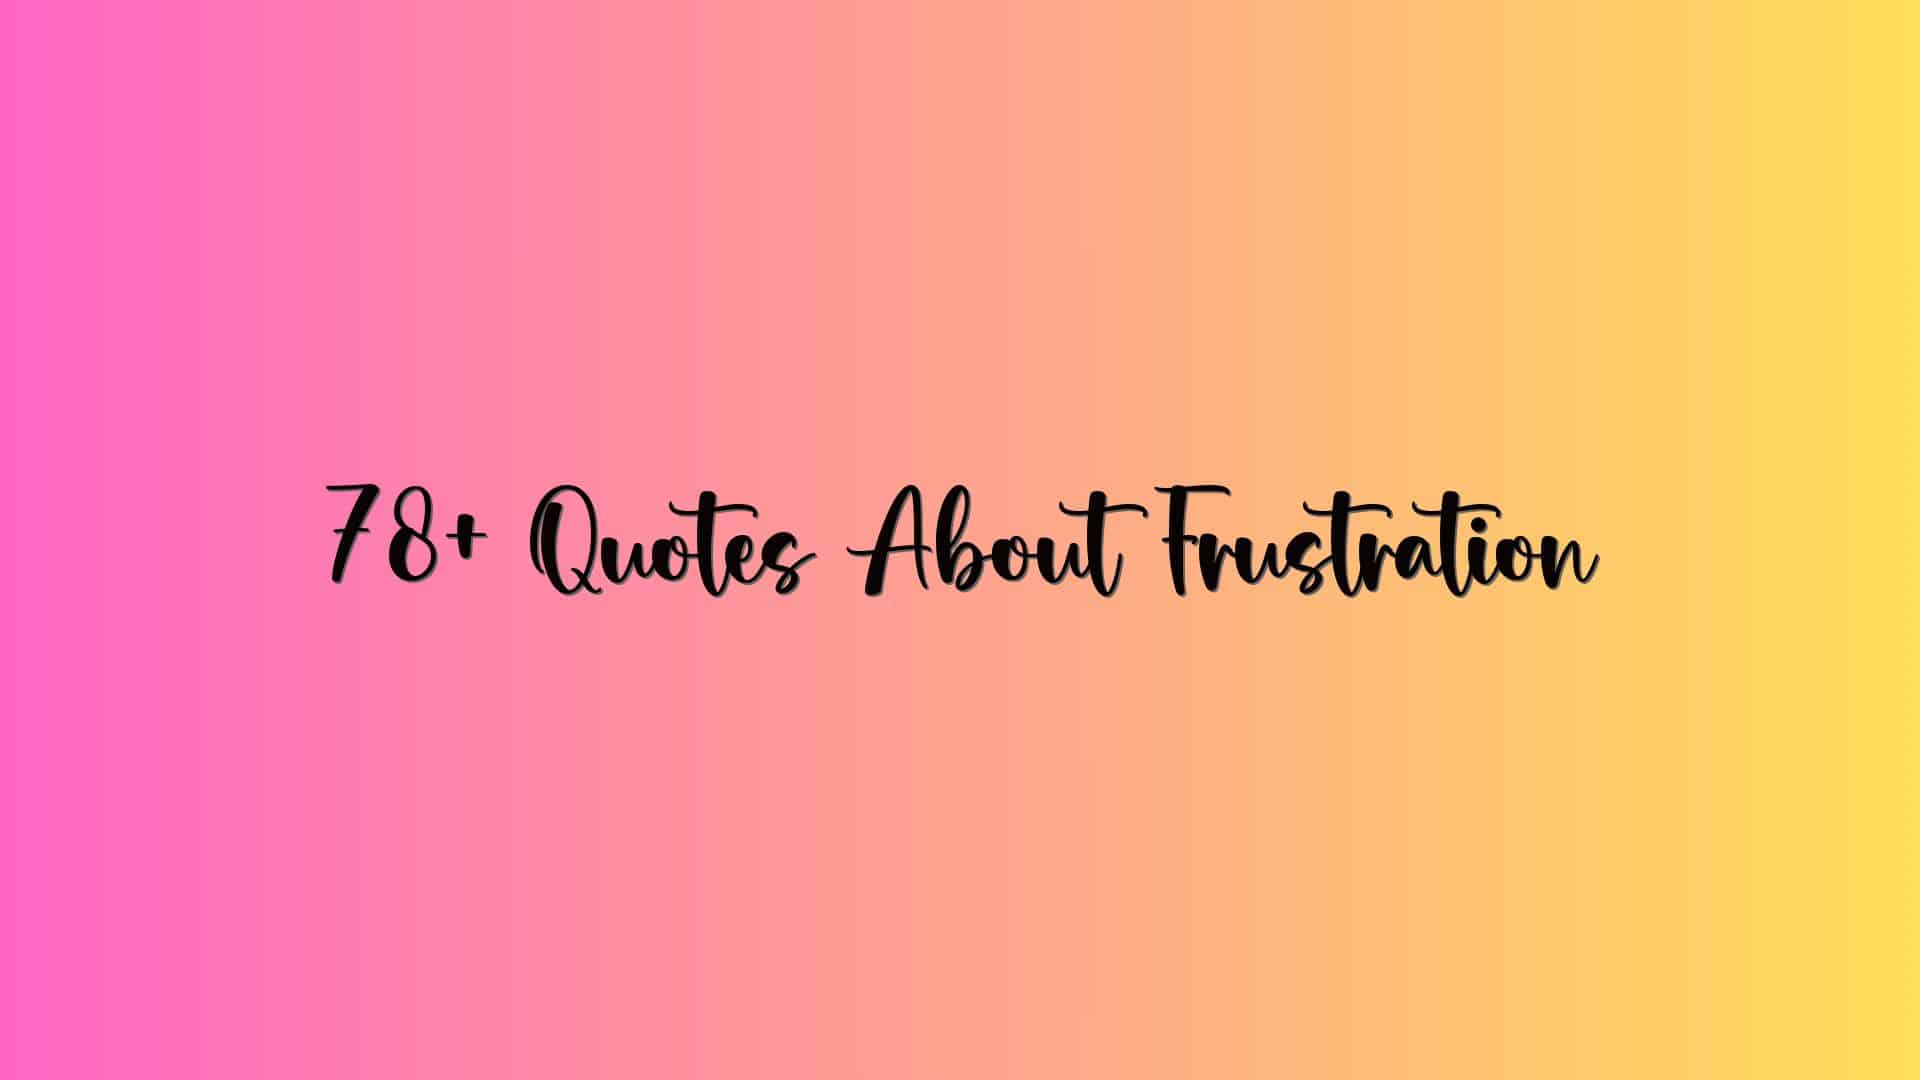 78+ Quotes About Frustration